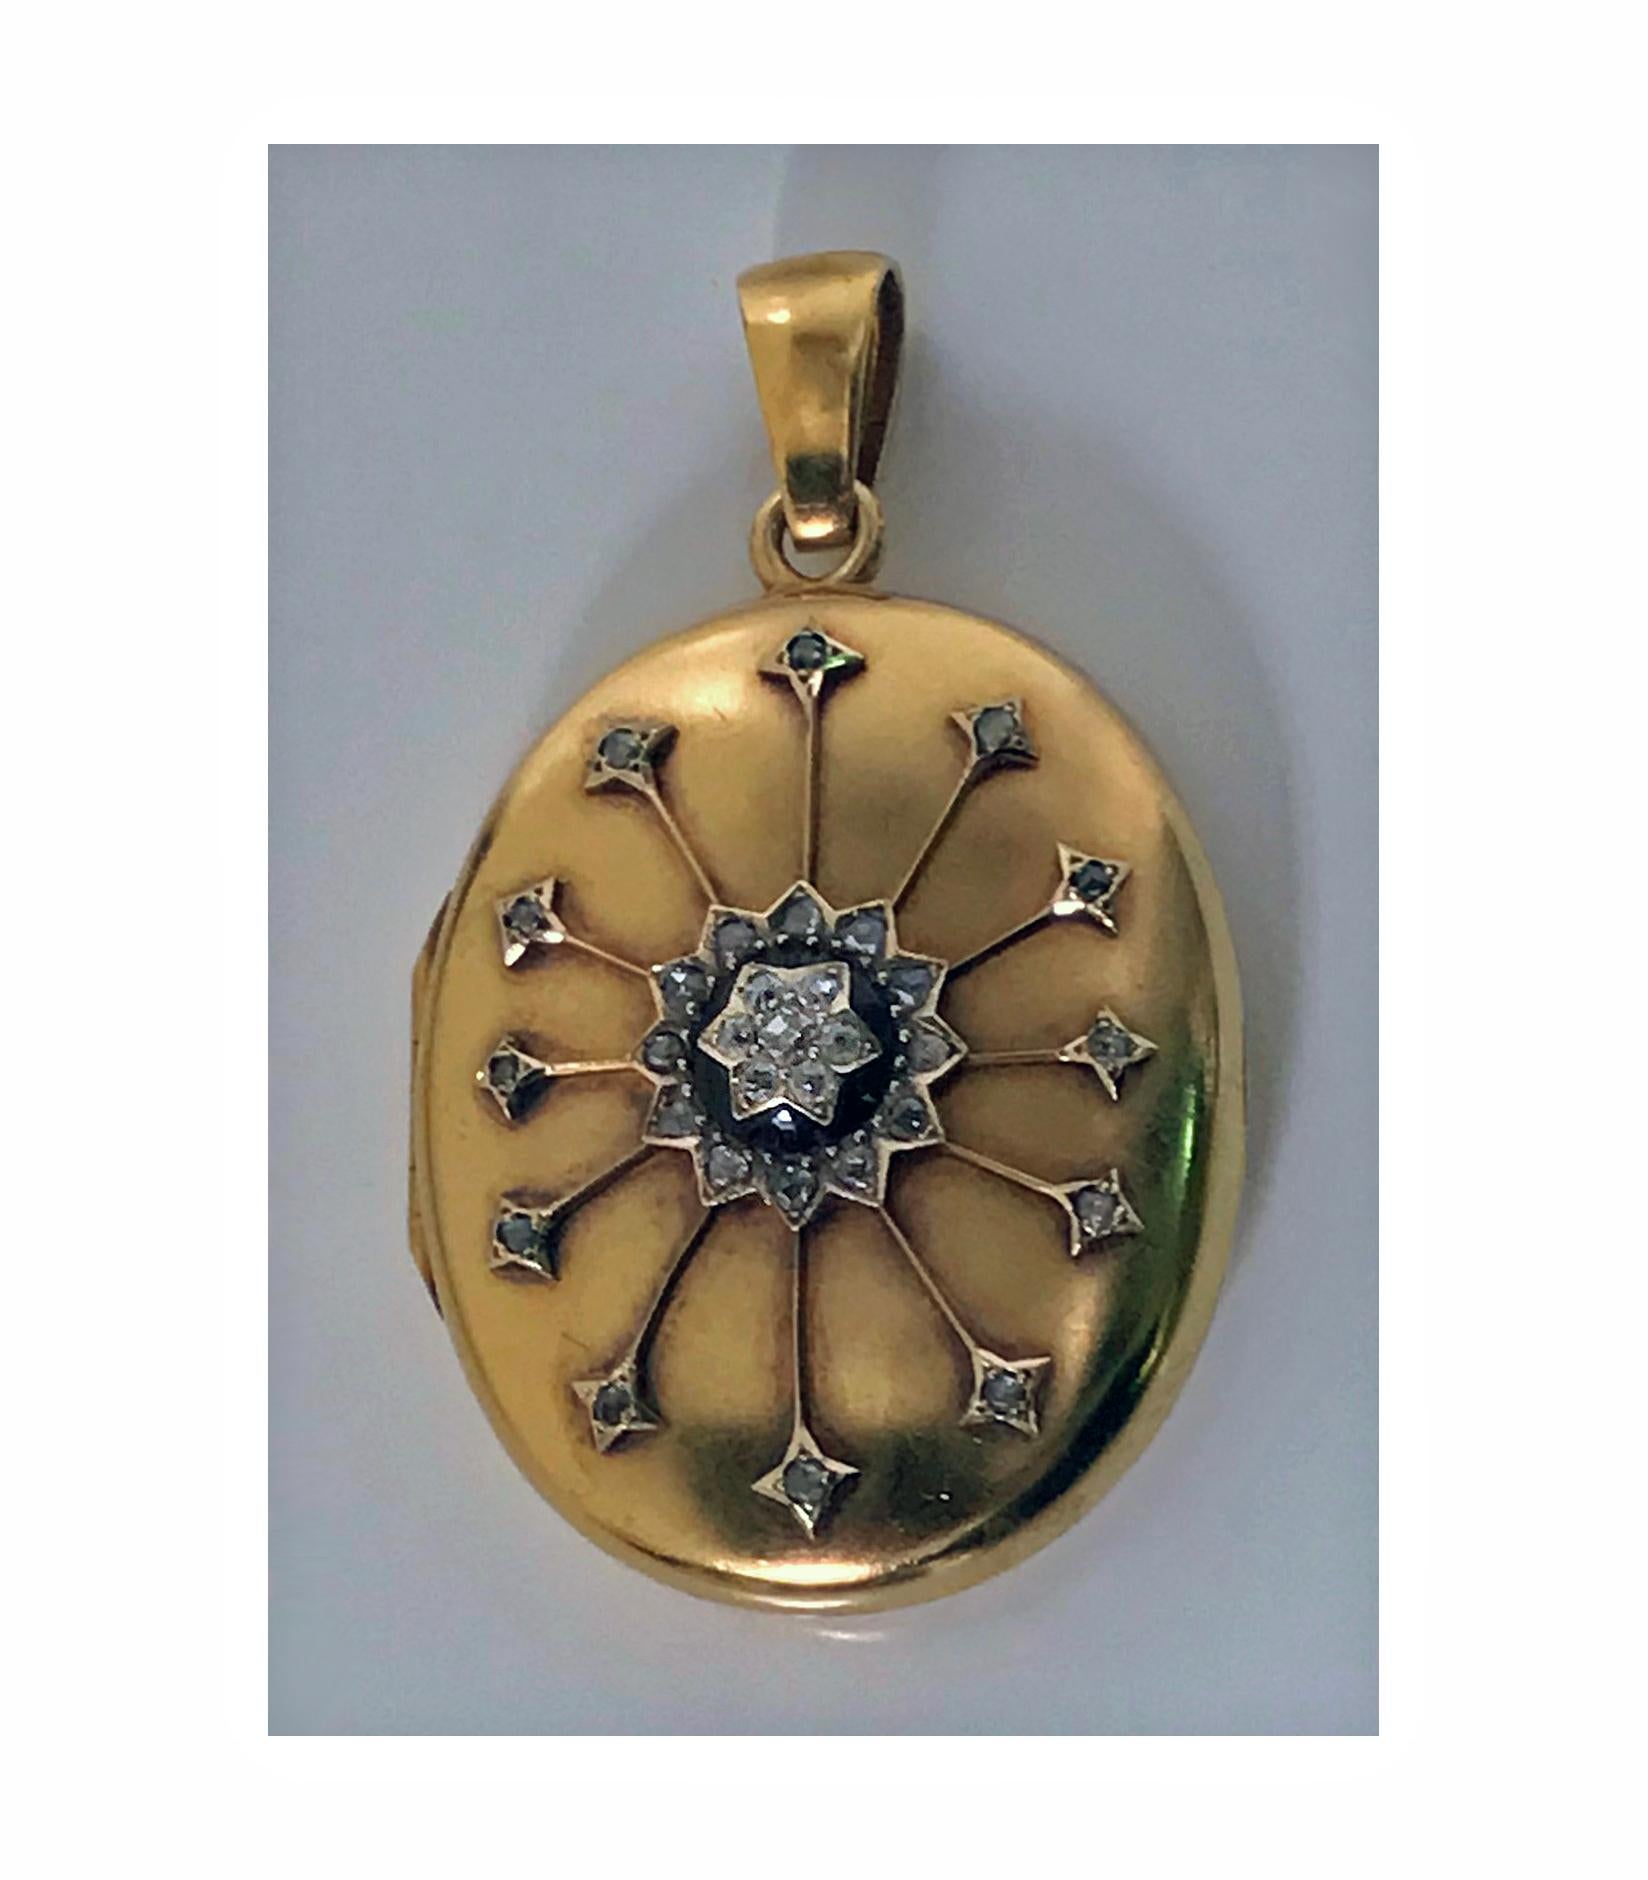 Antique 18-karat diamond large pendant locket, circa 1860. The front diamond star set centre surmounted on black onyx and diamond surround with applied gold diamond rays extending outwards, thirty one mixed old mine cut and rose cut diamonds, all on